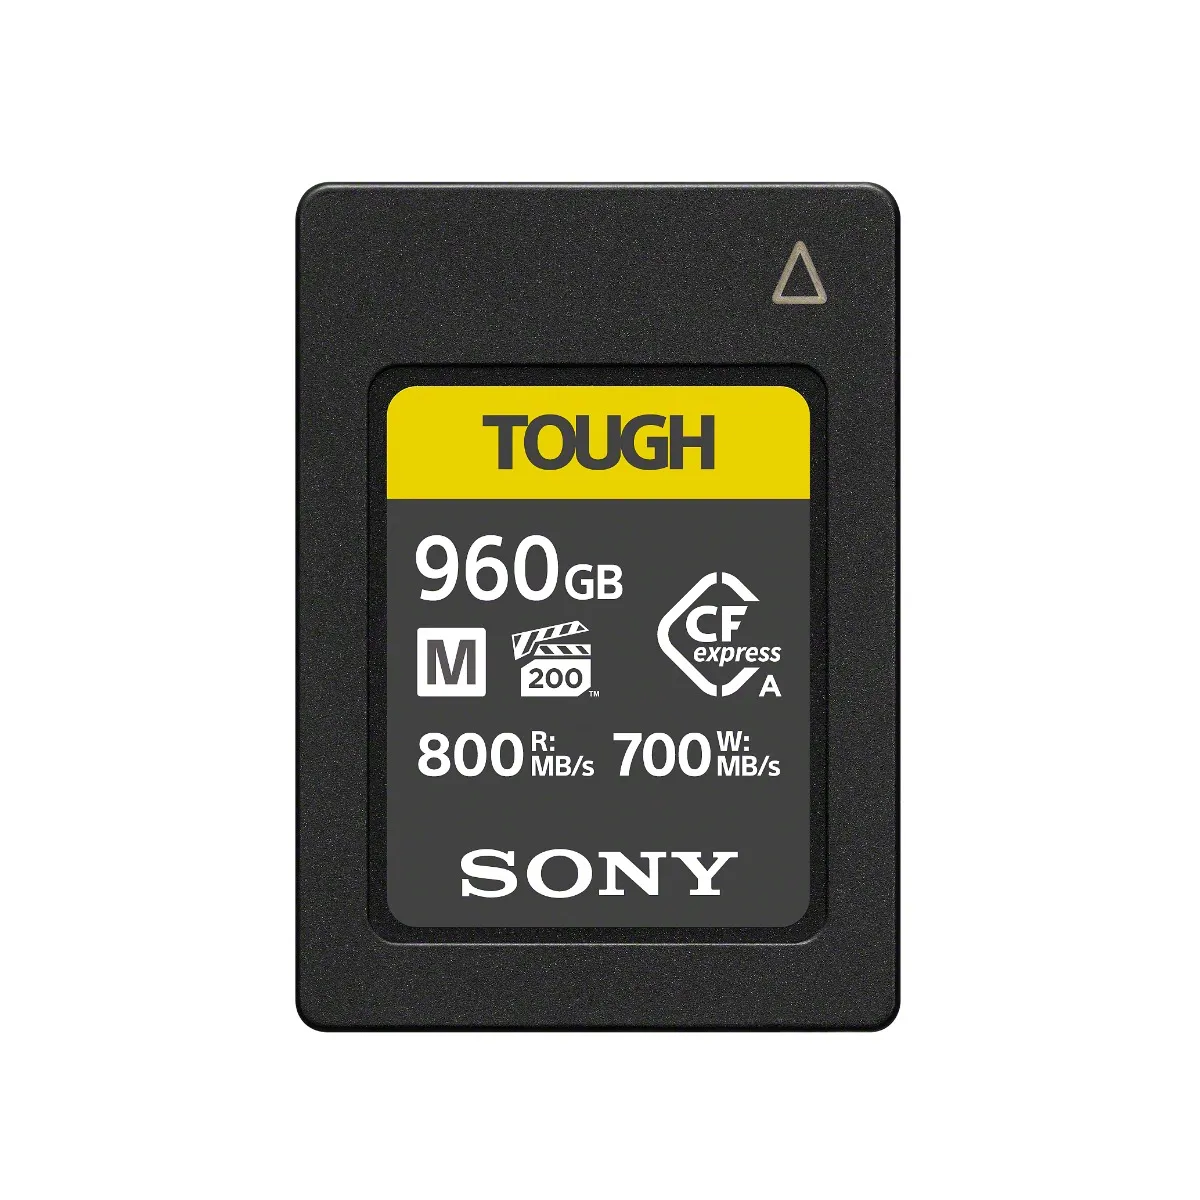 Image of Sony M Series CFExpress 960GB Type A Memory Card